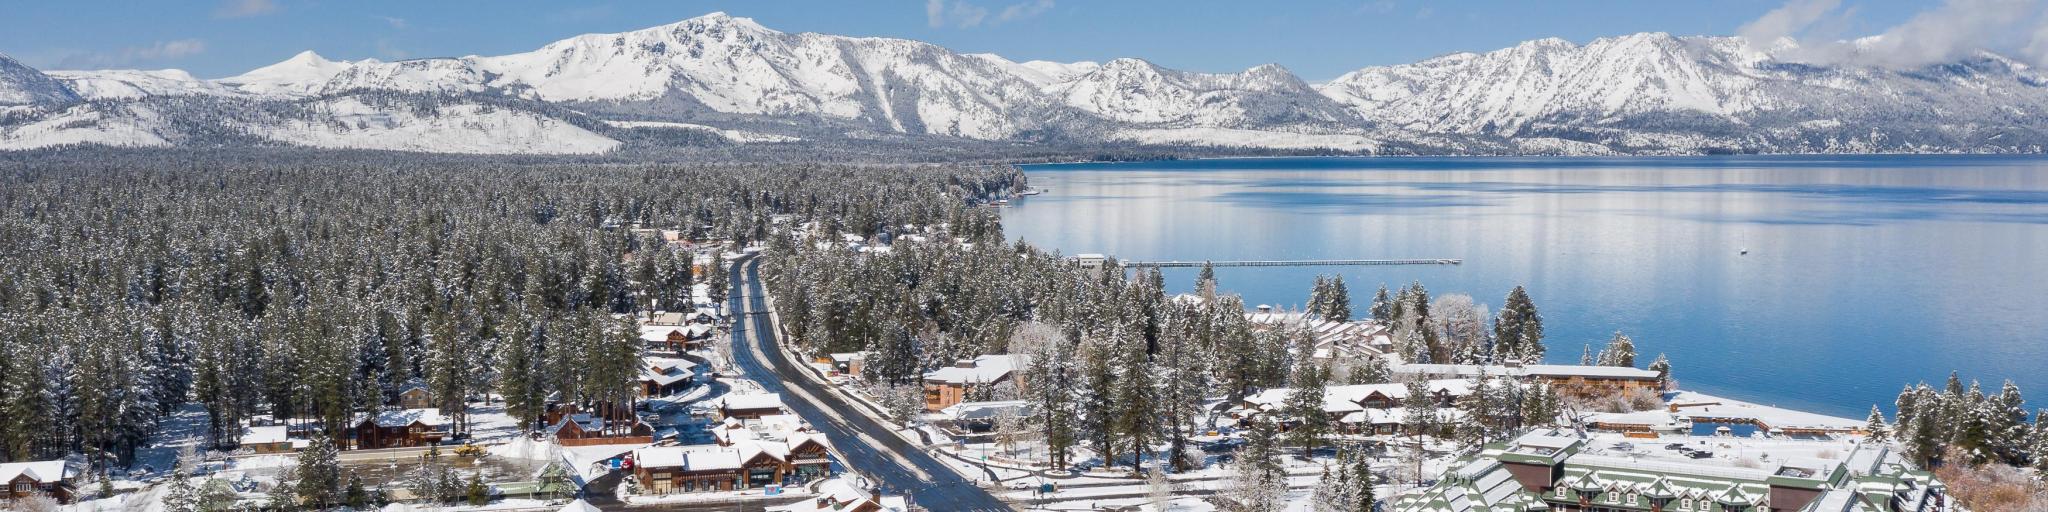 South Lake Tahoe - Rare Empty Streets and Roads during April 2020